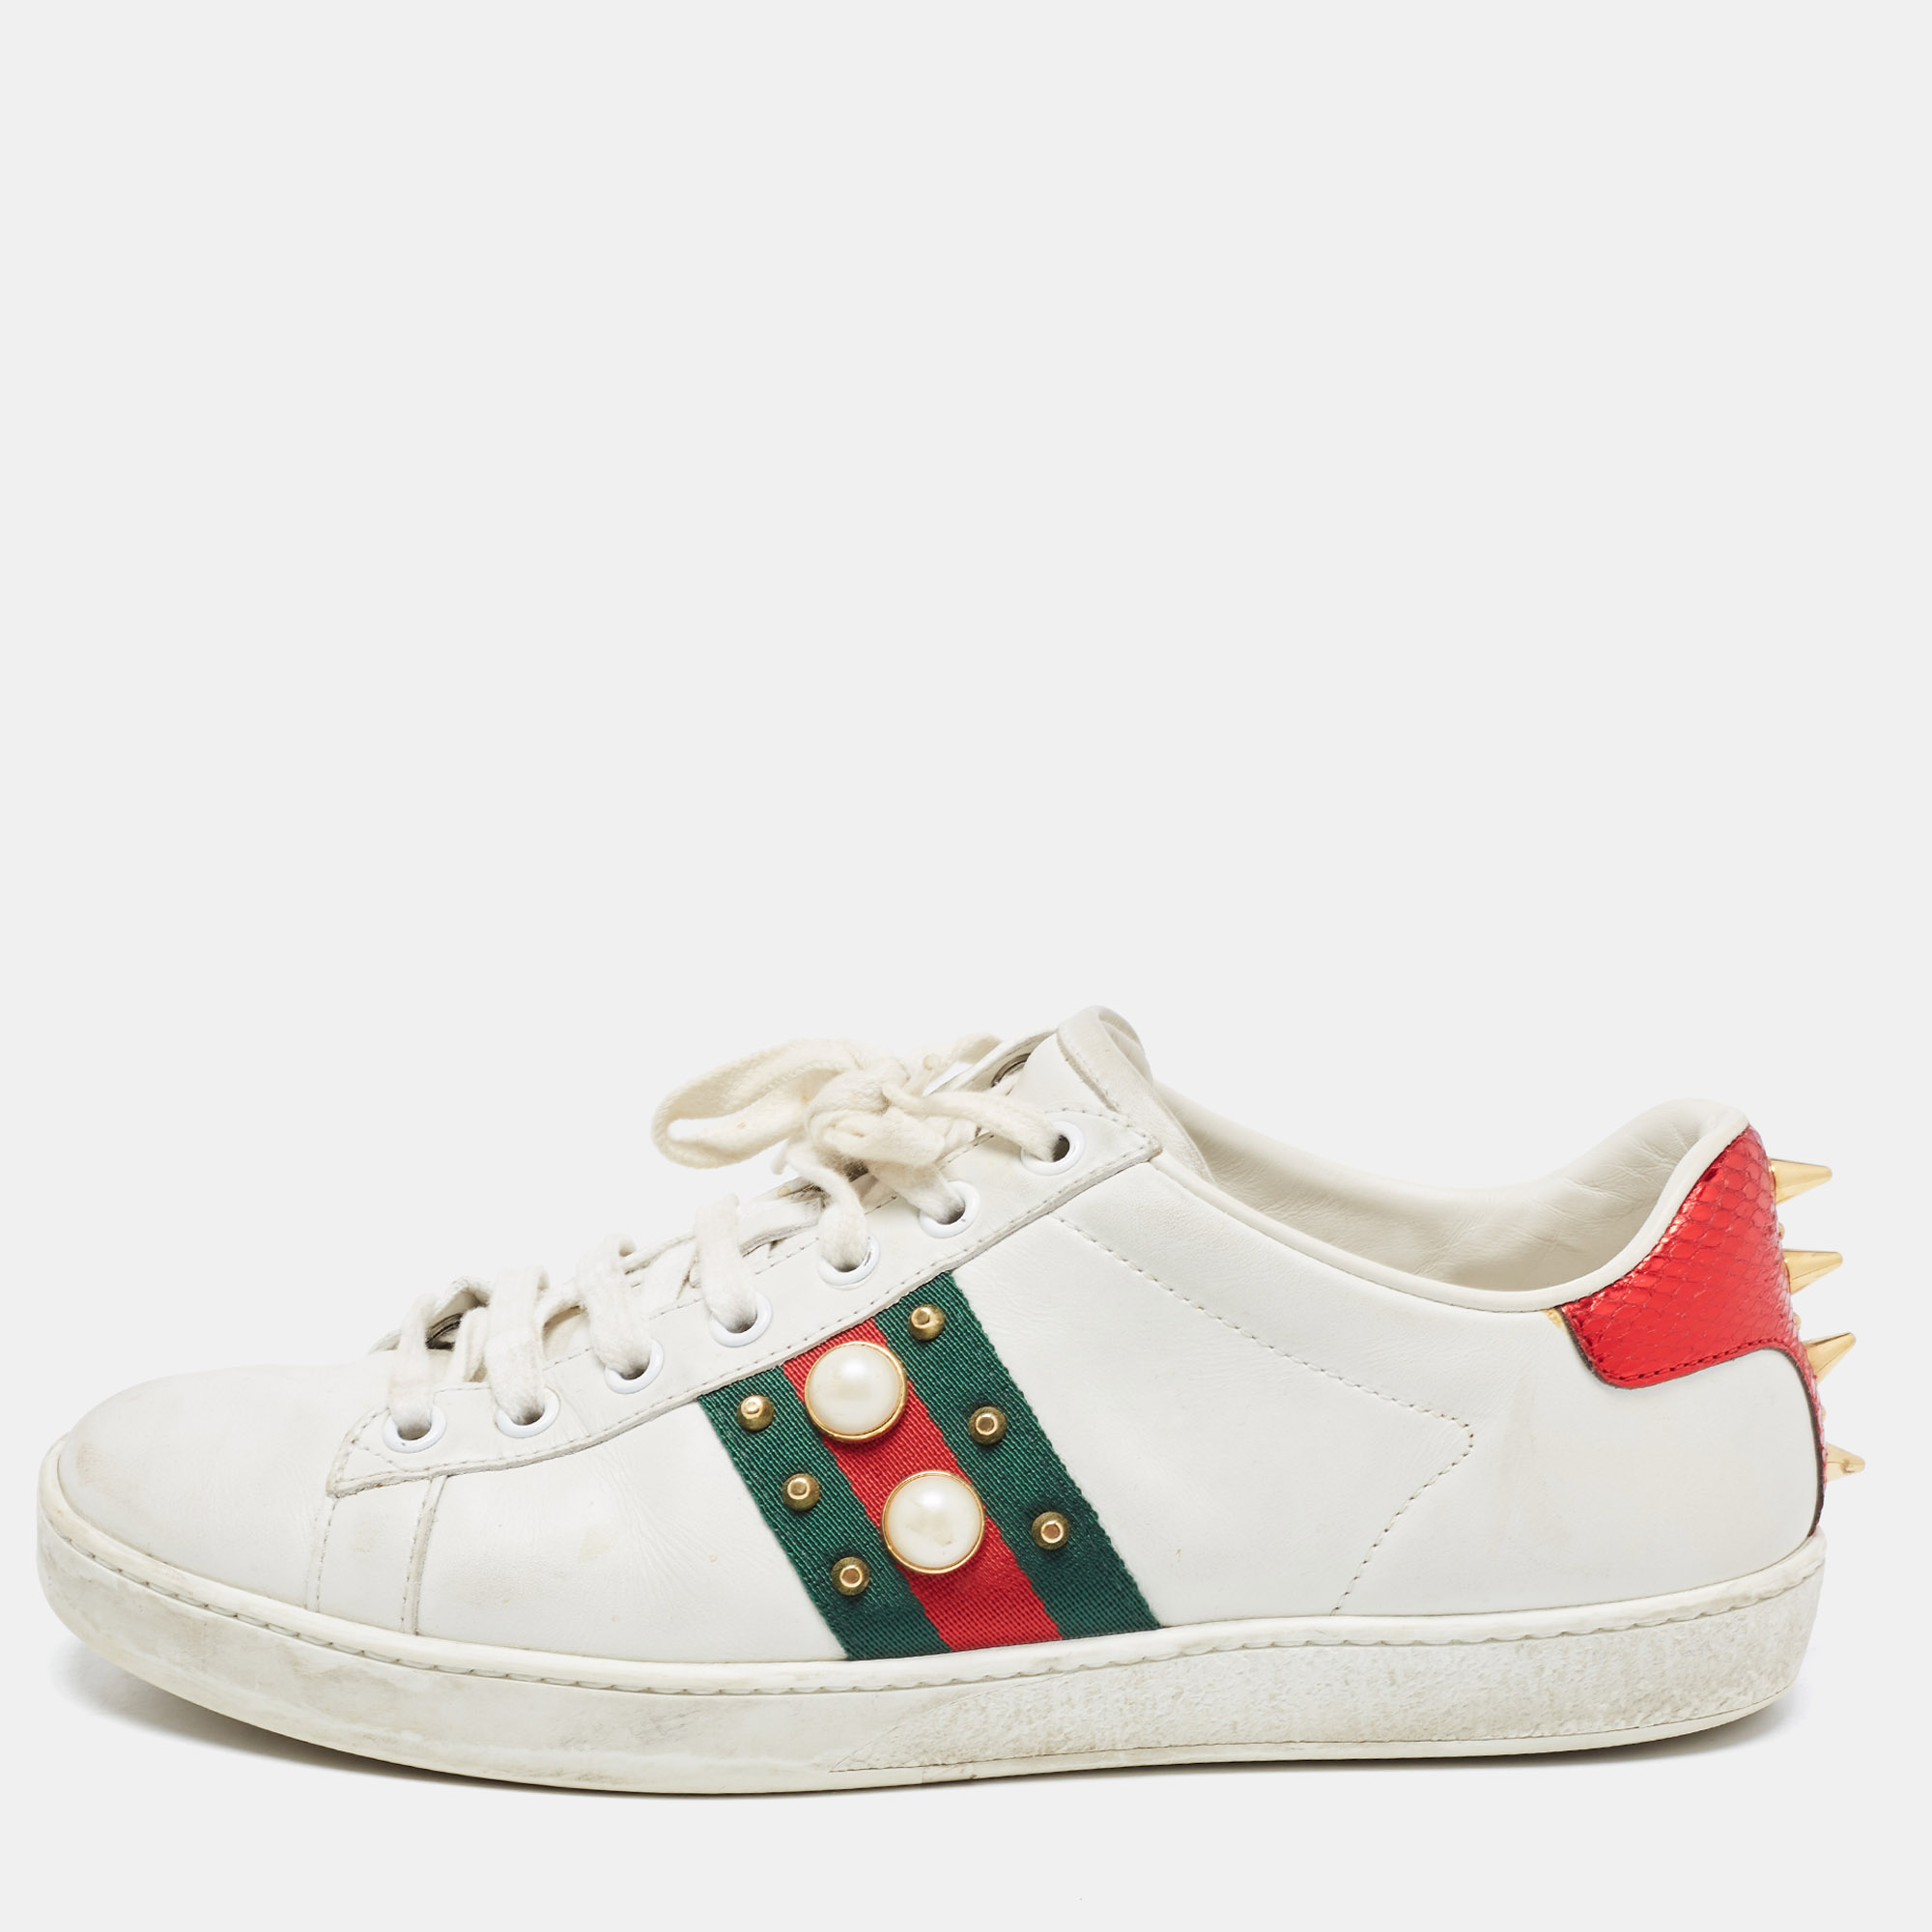 Pre-owned Gucci White Leather Web Ace Low Top Sneakers Size 37.5